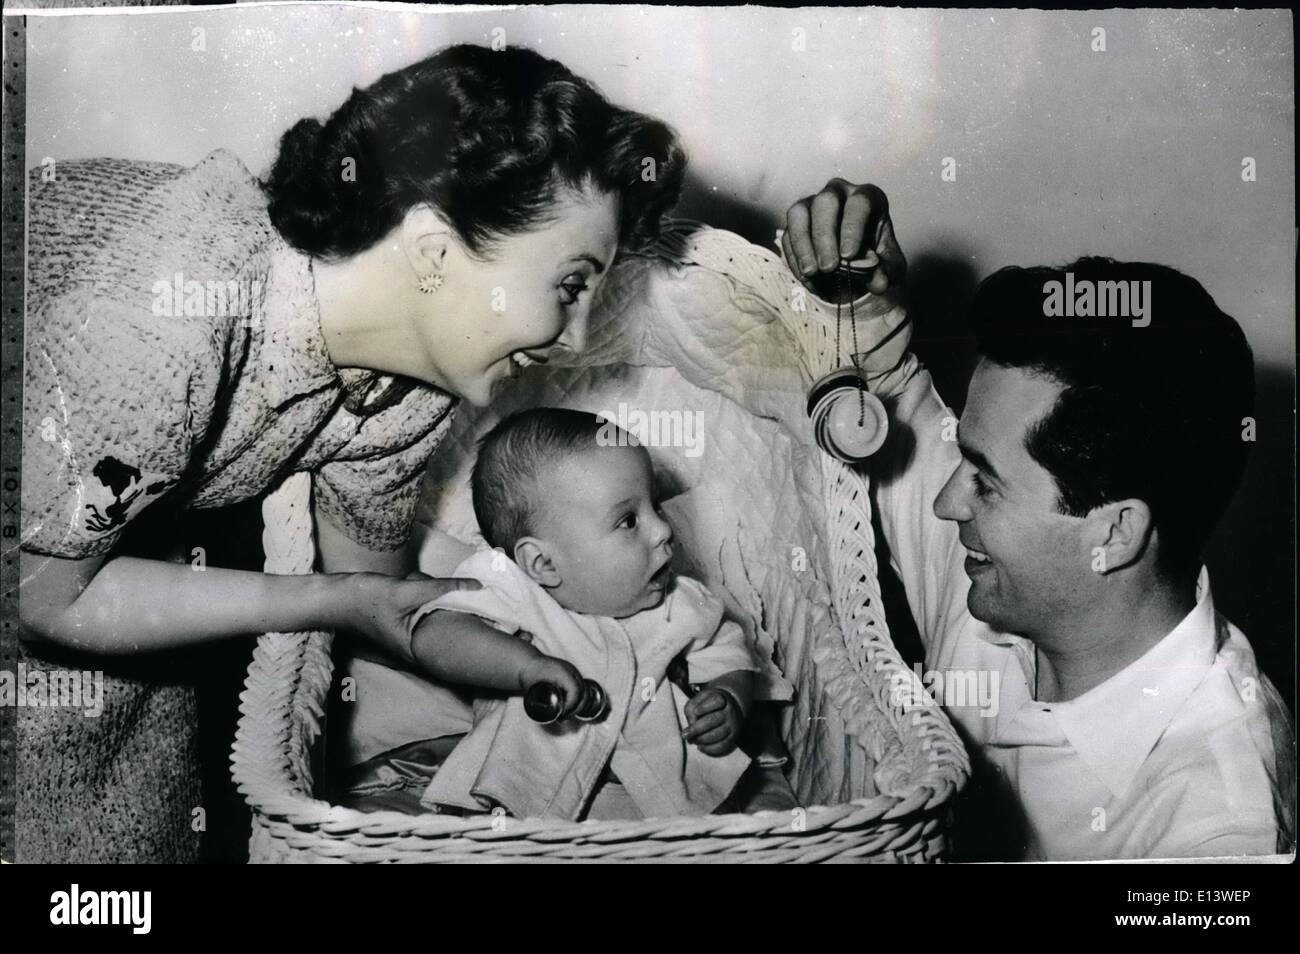 Mar. 27, 2012 - Garrett Is The Centre of Attraction.. The Parkes An Their Young Son. Garrett Christopher is only a baby - but he is the most important person in the world to screen star Larry Parkes and Betty Garrett (Mr. and Mrs. Parkes) his parents - seen here having a spot of fun together. Stock Photo